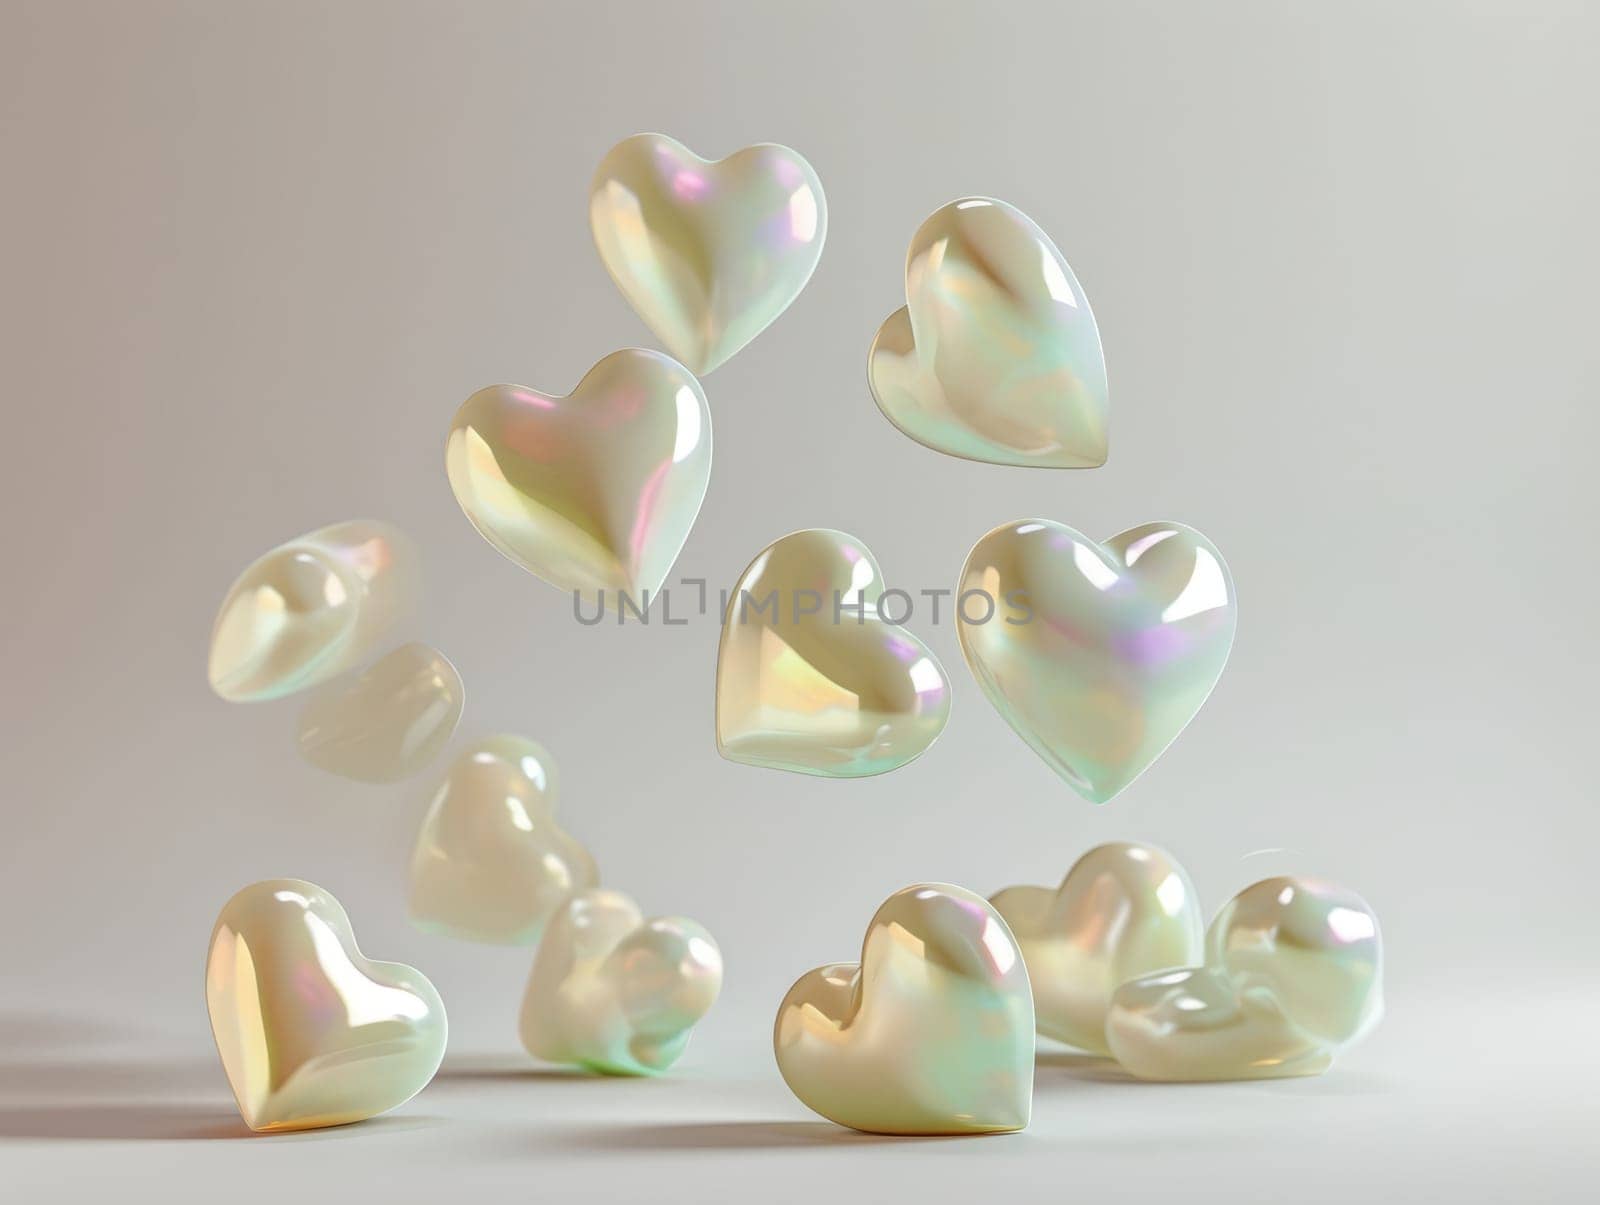 3D Realistic Shiny Shimmering Hearts Background. Valentine's Day Hearts Wallpaper. Glossy Hearts Backdrop with Space for Text. by iliris